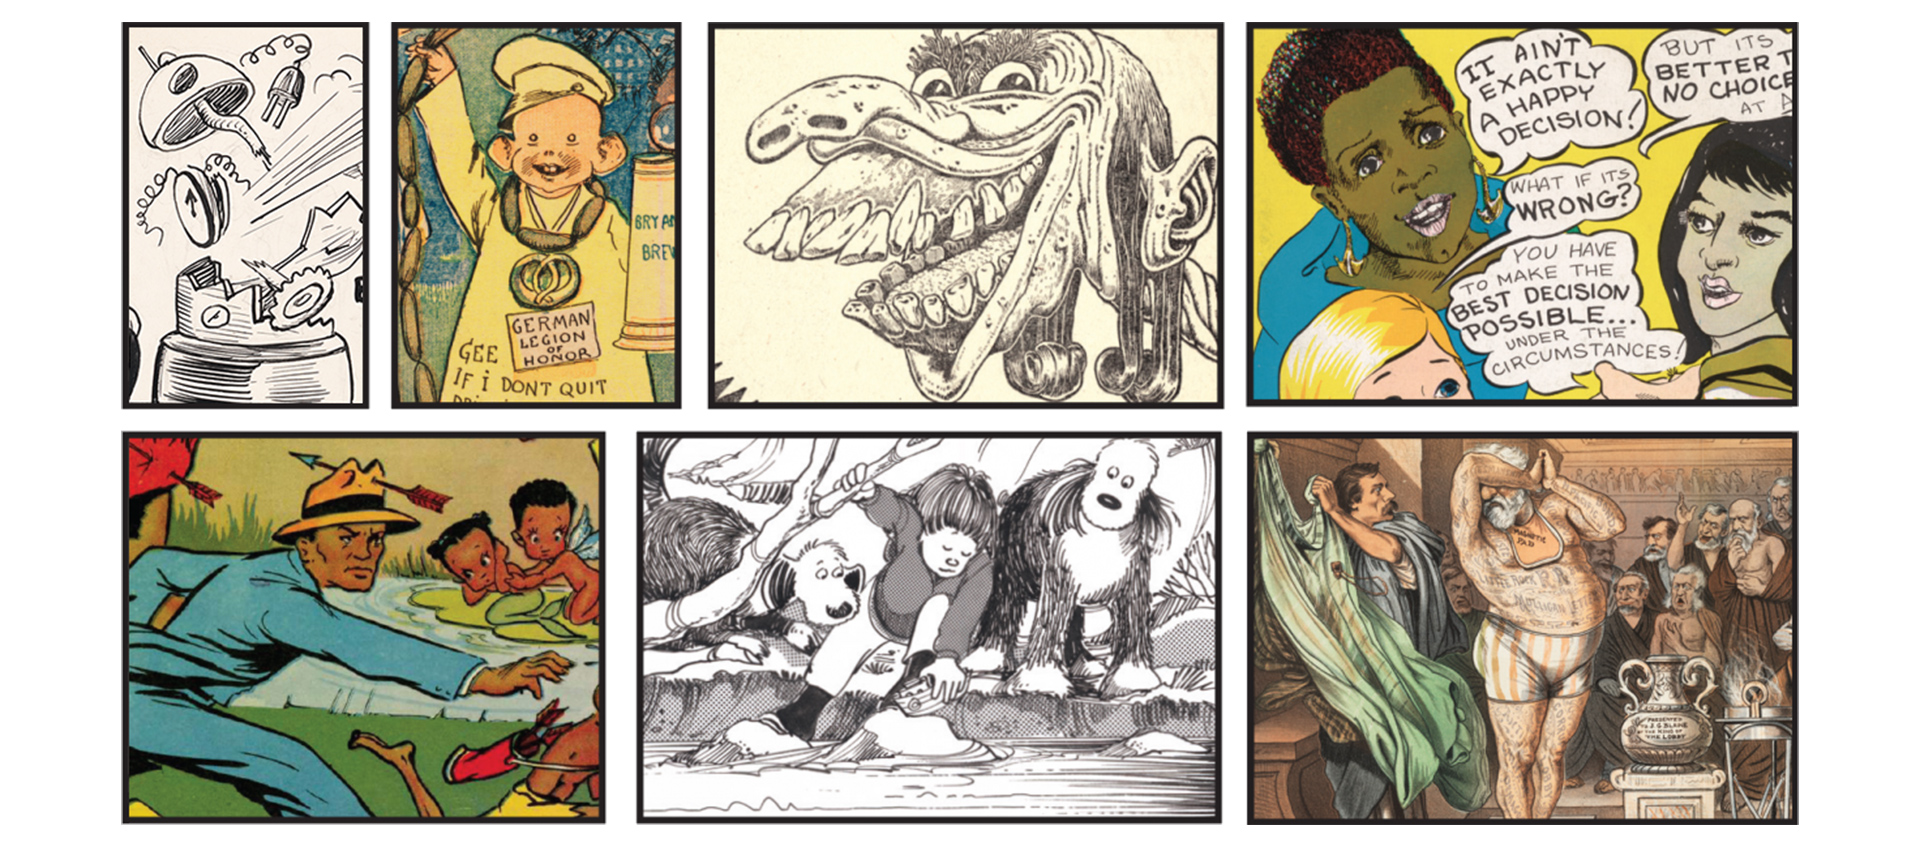 Cartoon panels from the Billy Ireland Cartoon Library and Museum's virtual exhibition.